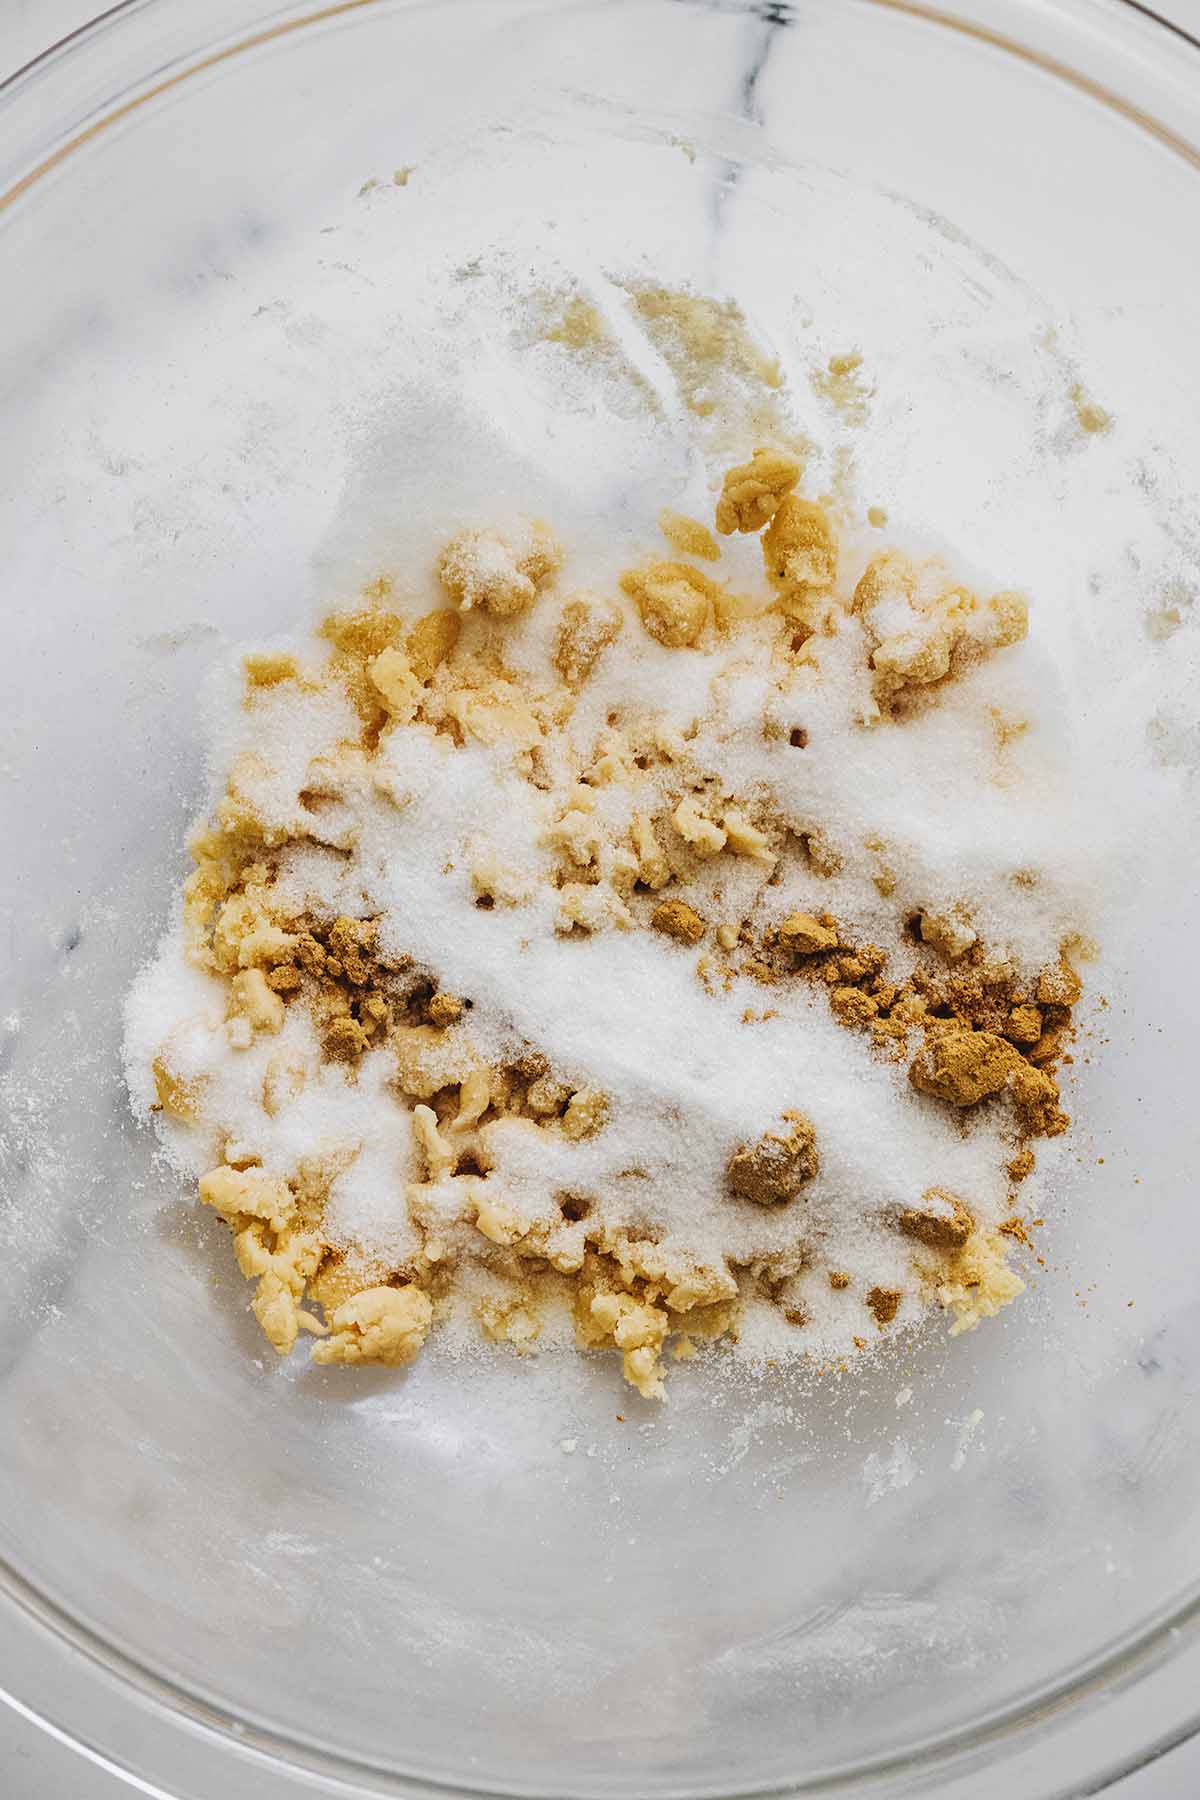 Sugar and ground ginger in a glass bowl with flour and butter crumbles